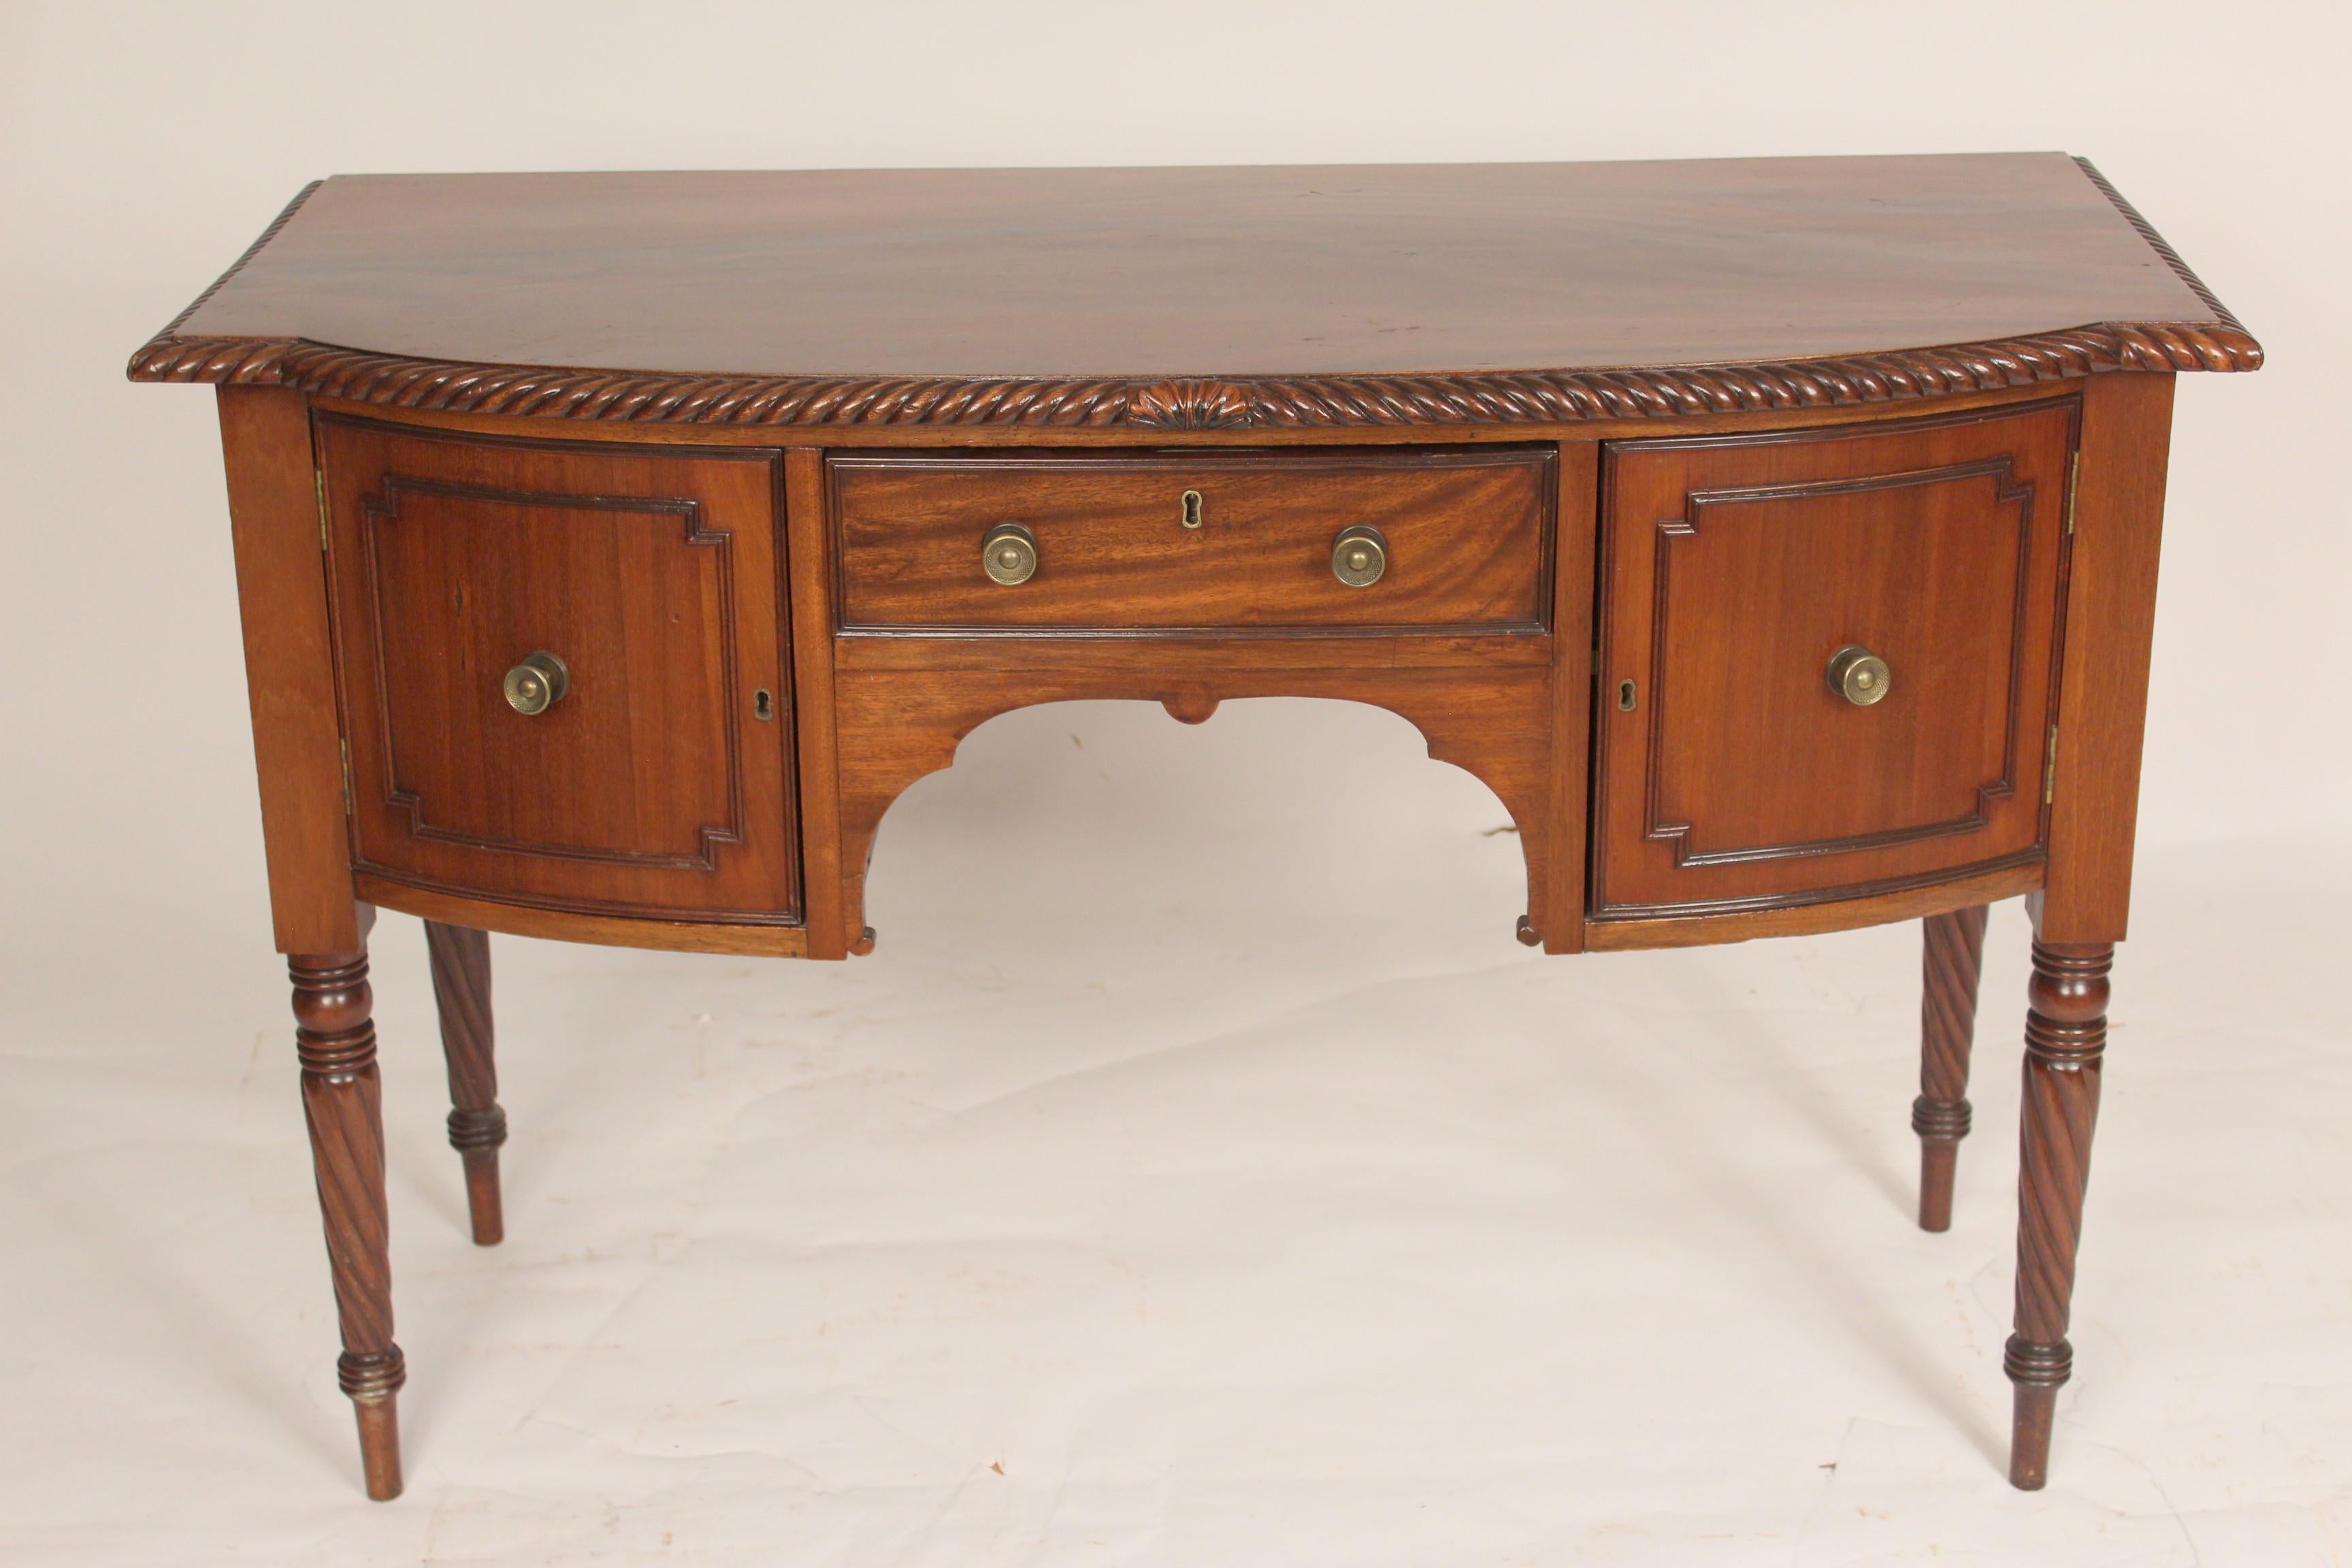 Late George III mahogany small scale sideboard, early 19th century. With a nicely grained mahogany top, a central drawer flanked by two cupboard doors, resting on rope turned legs.